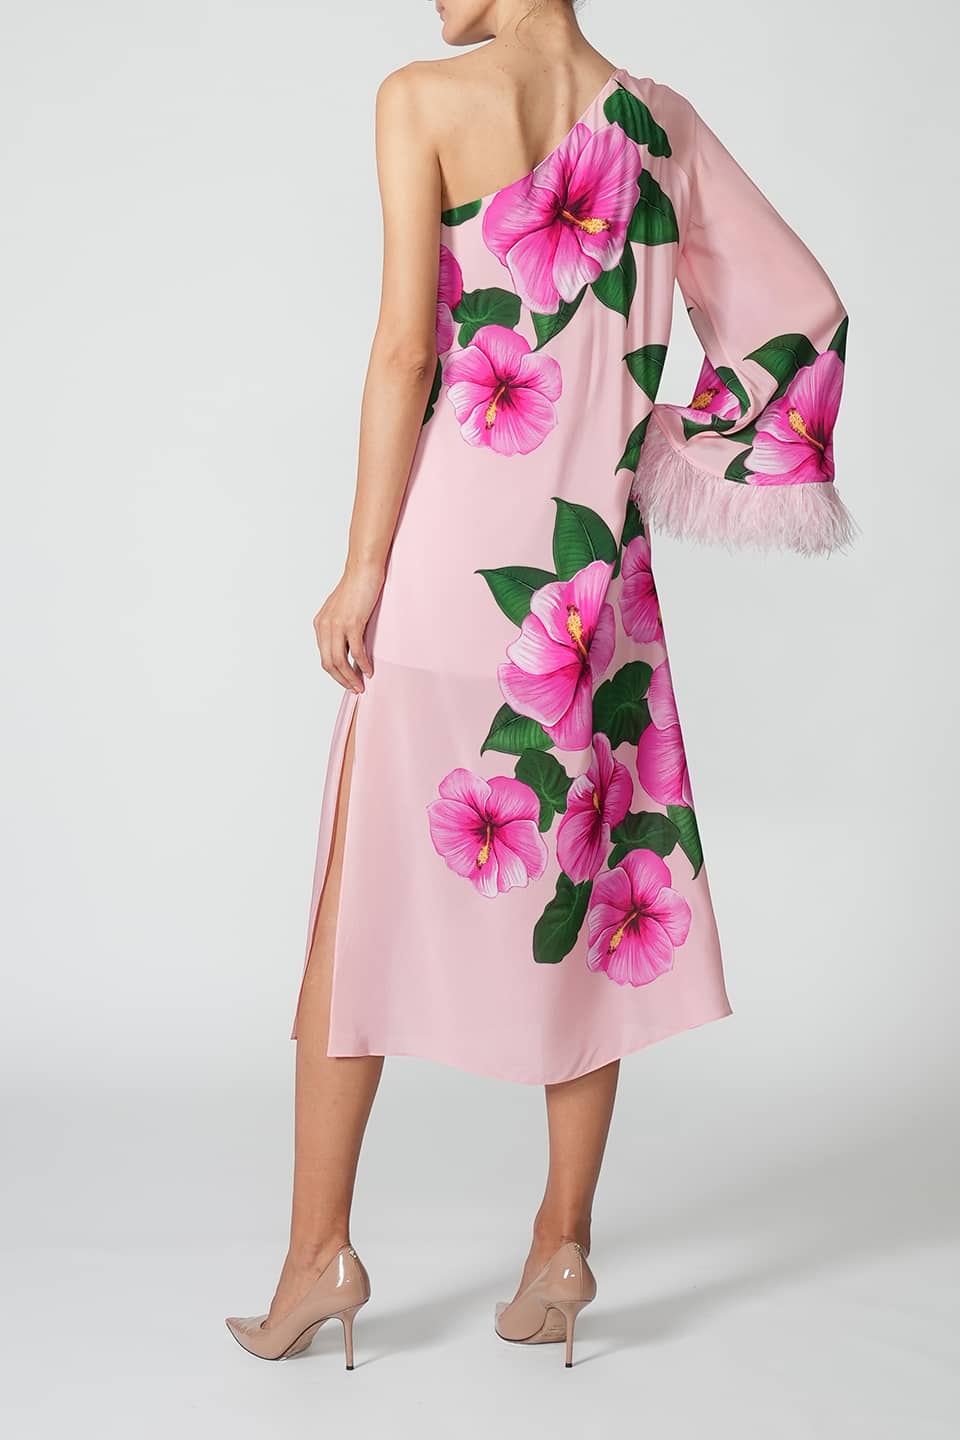 Thumbnail for Product gallery 4, Fashion designer midi dress pink, trendy dress with floral print